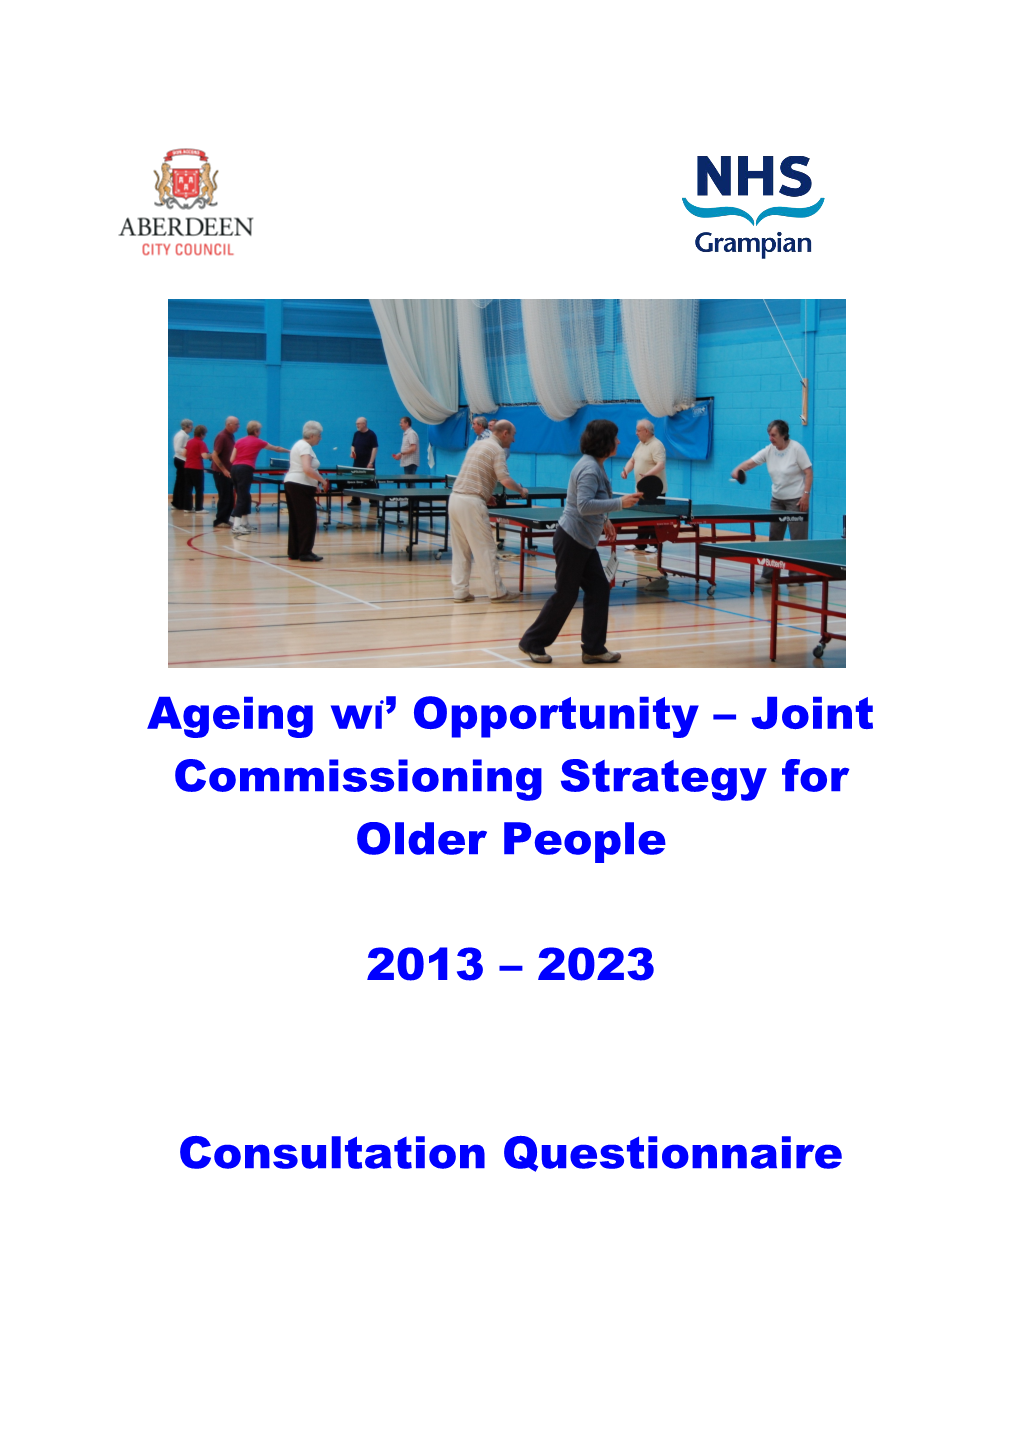 Ageing Wוֹ Opportunity Joint Commissioning Strategy for Older People